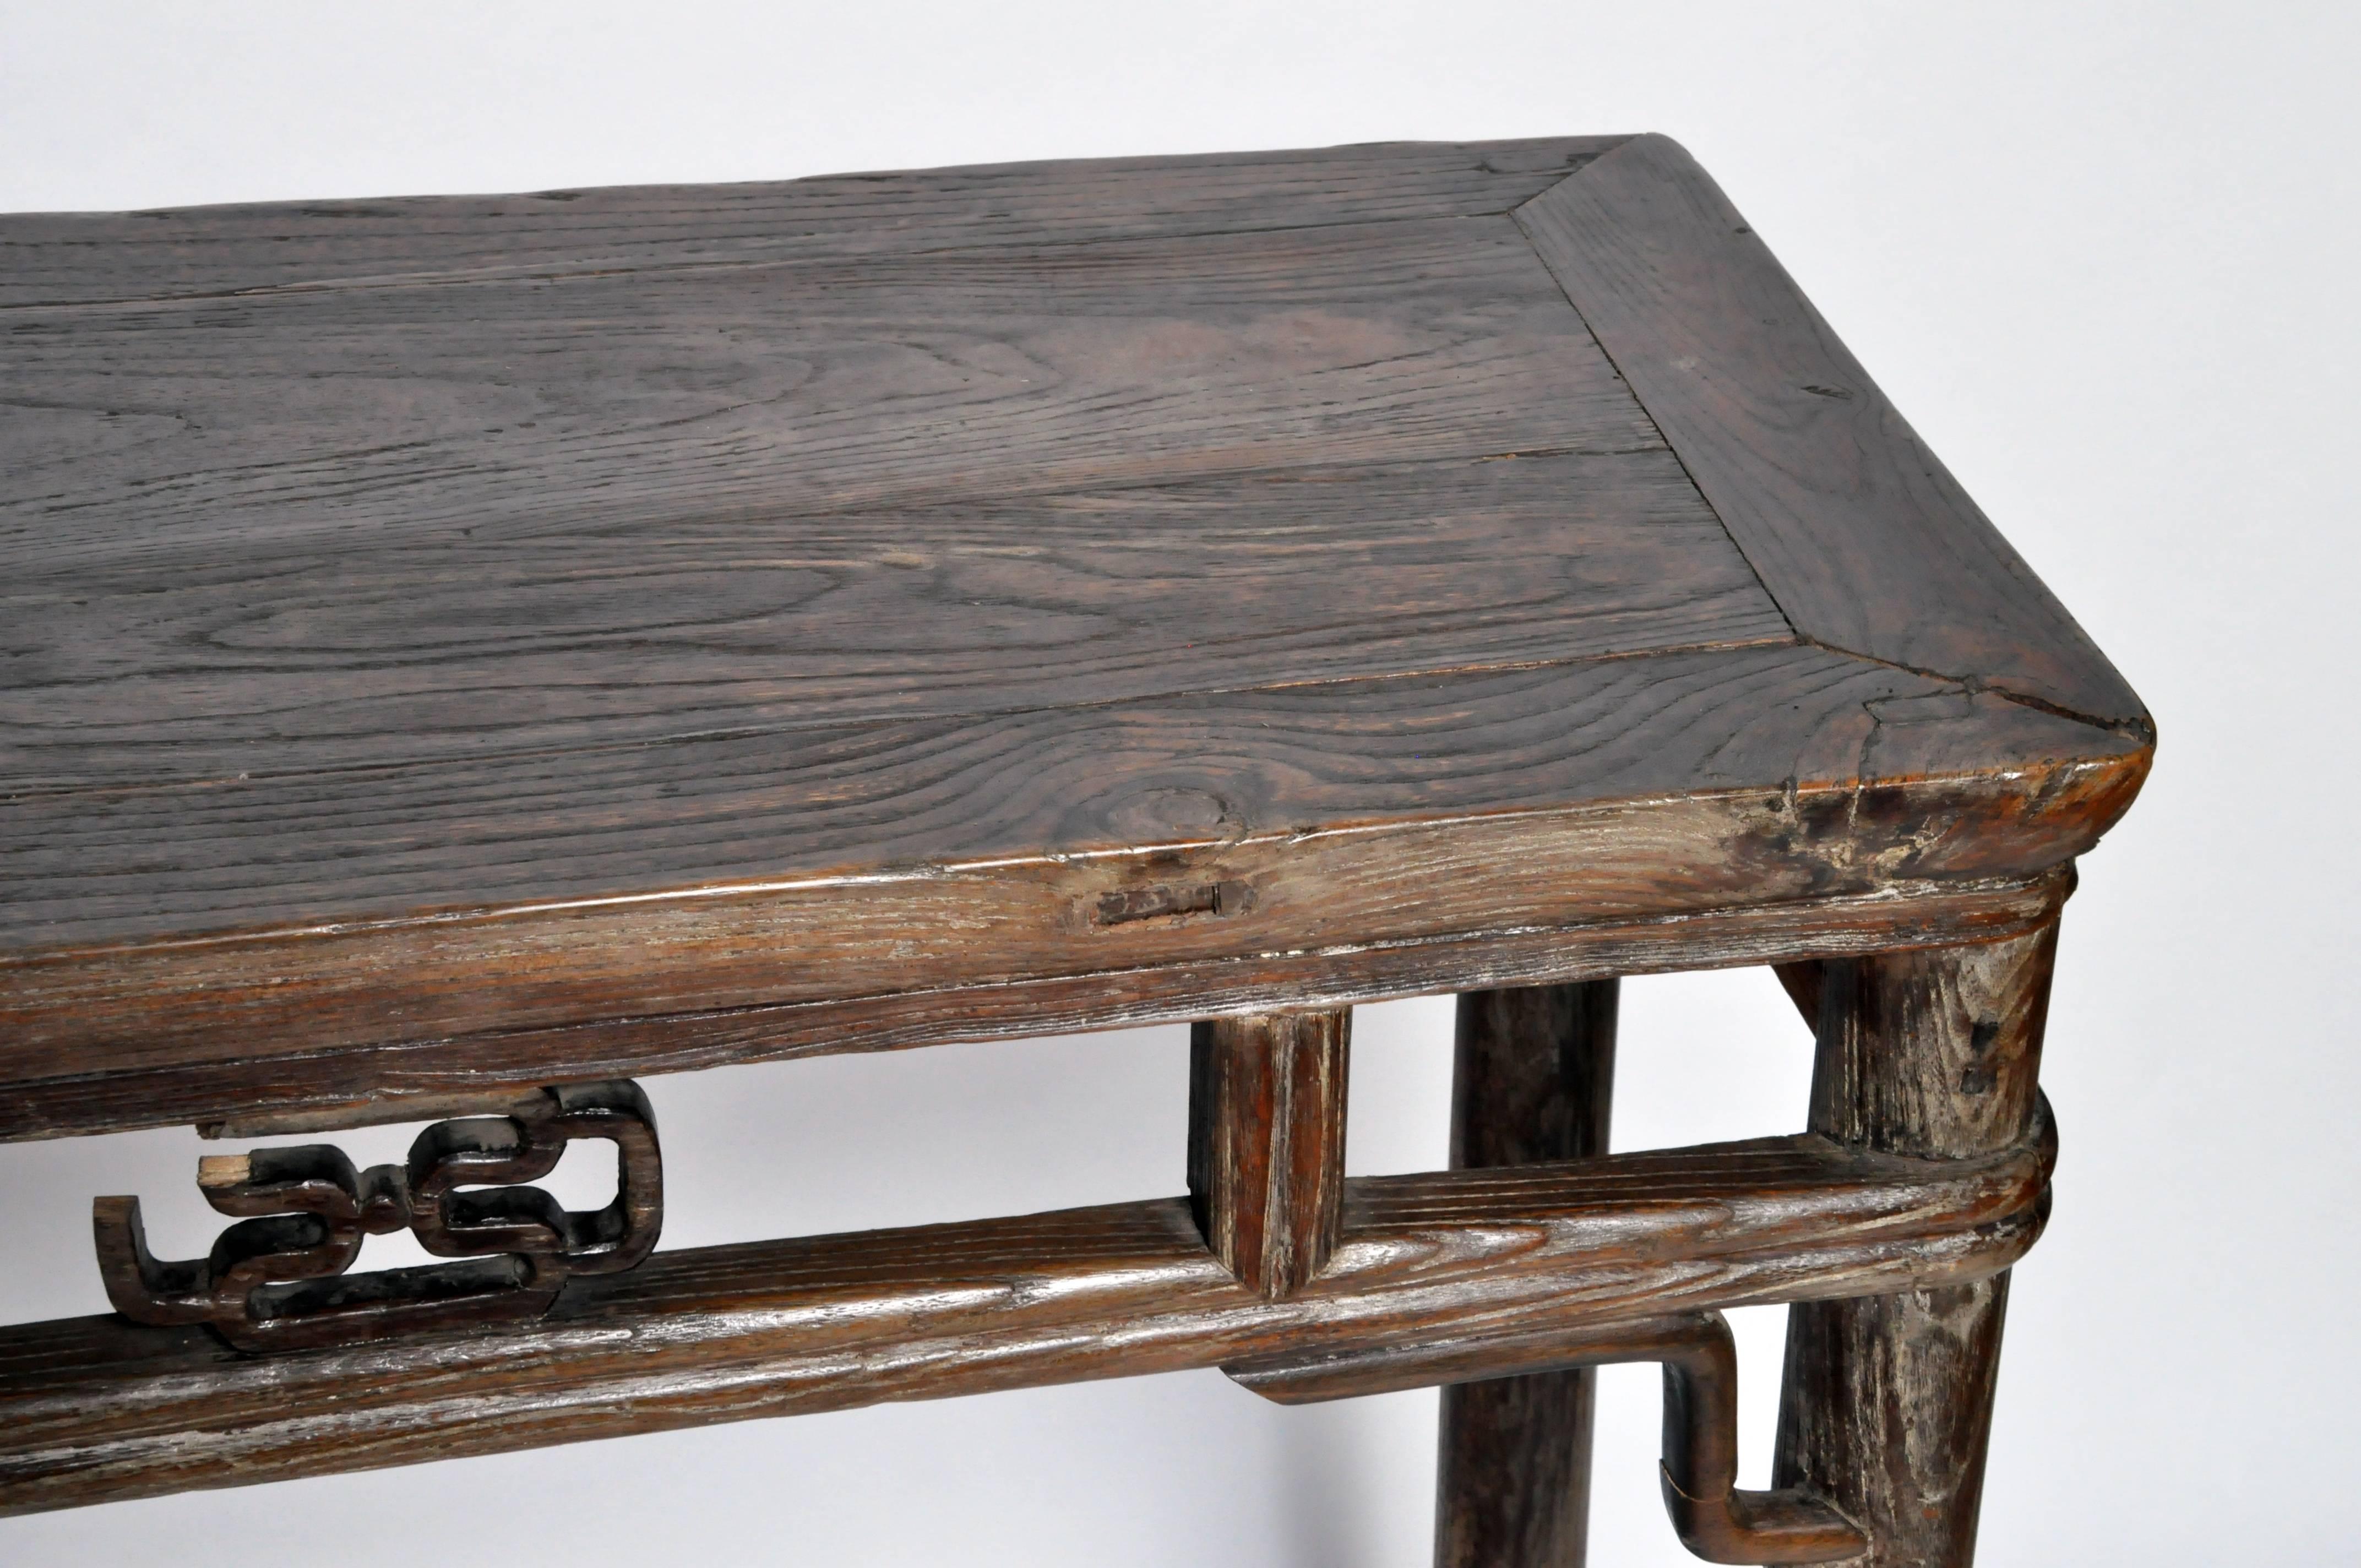 Elm Qing Dynasty Altar Table with Rounded Legs and Original Lacquer